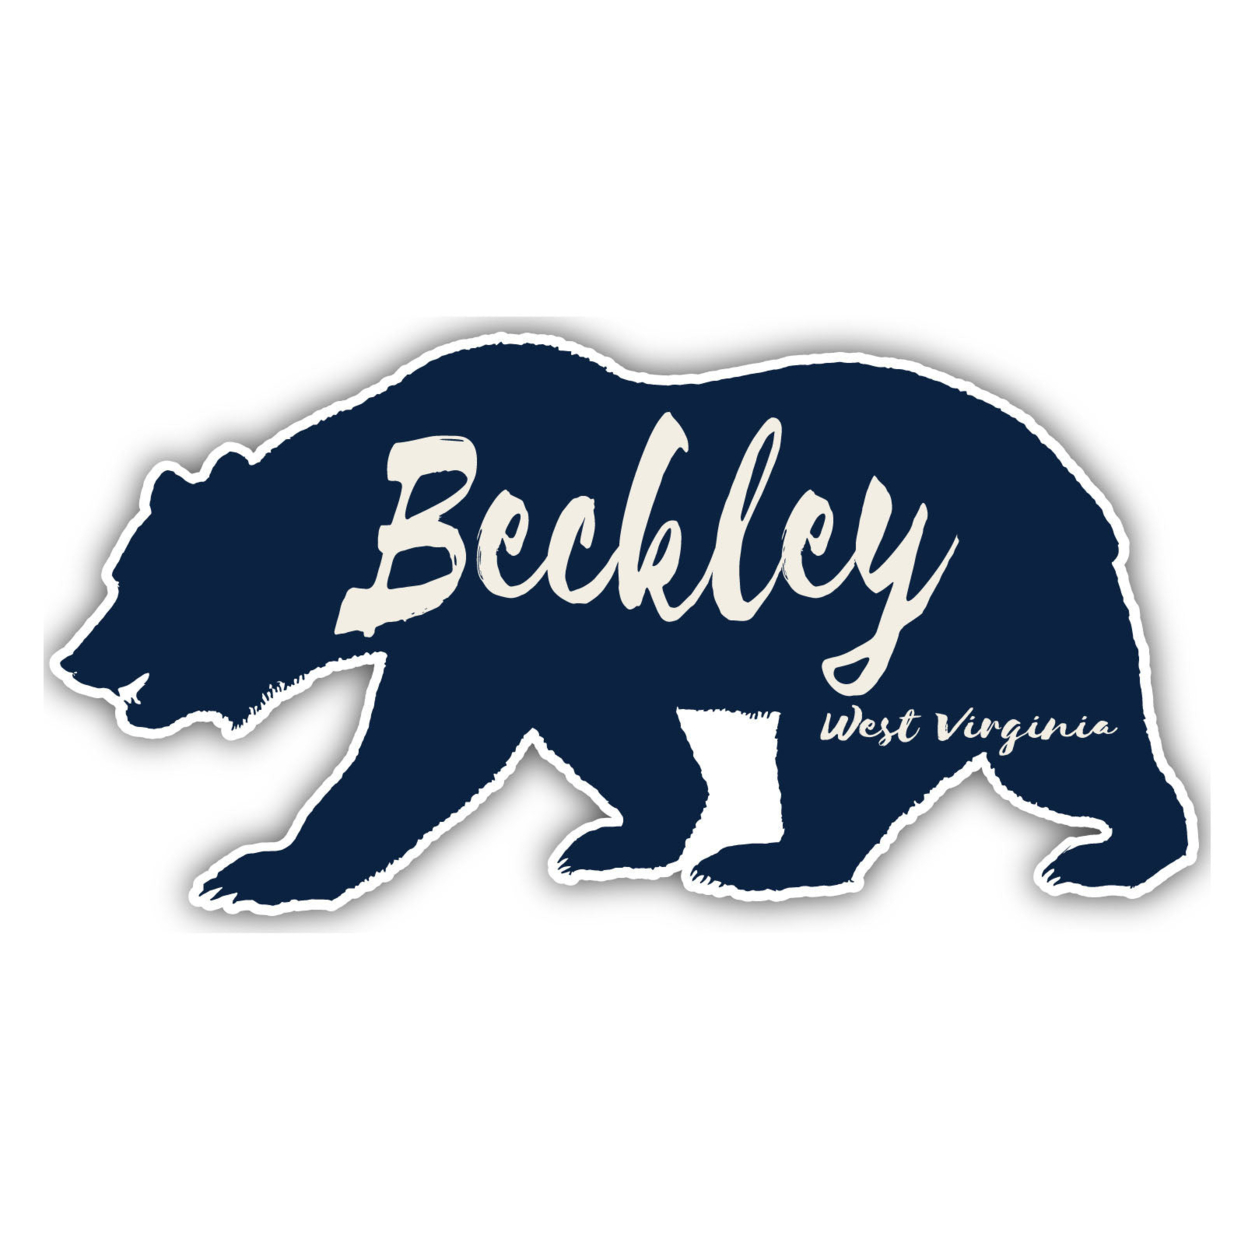 Beckley West Virginia Souvenir Decorative Stickers (Choose Theme And Size) - 4-Pack, 10-Inch, Bear